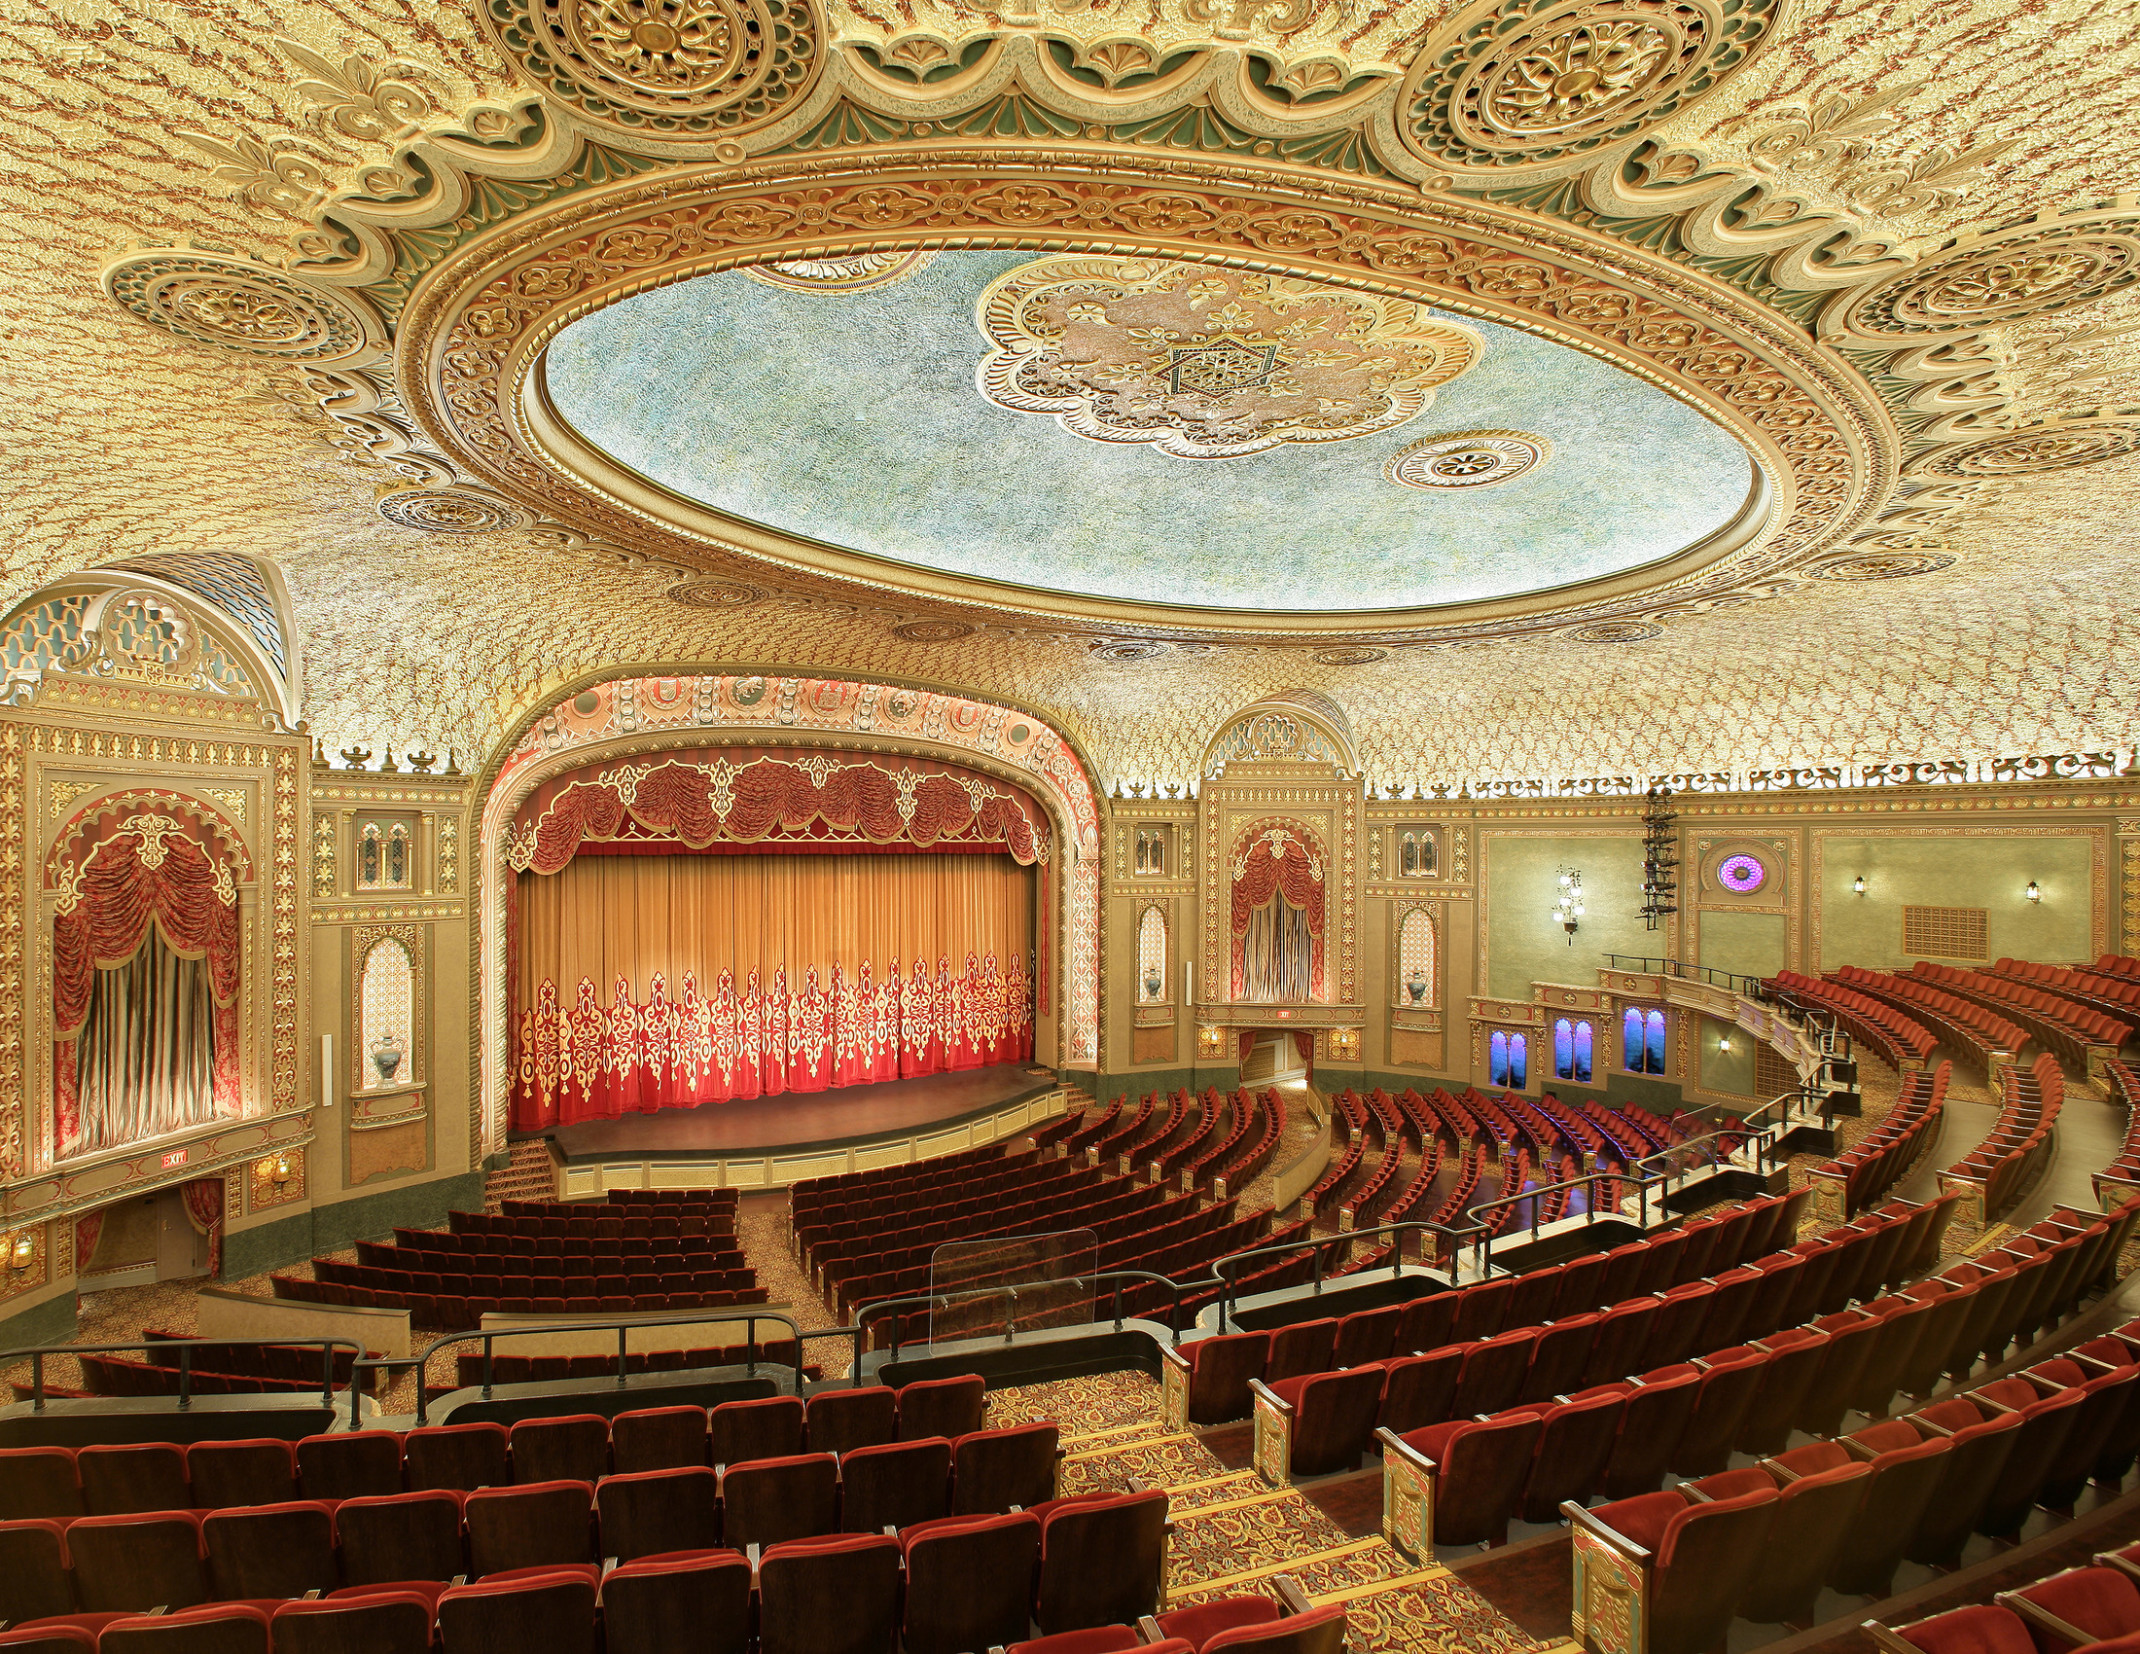 Interior of the Tenessee Theater, seen from the balcony looking to stage. Ornate patterned ceiling with round recessed detail